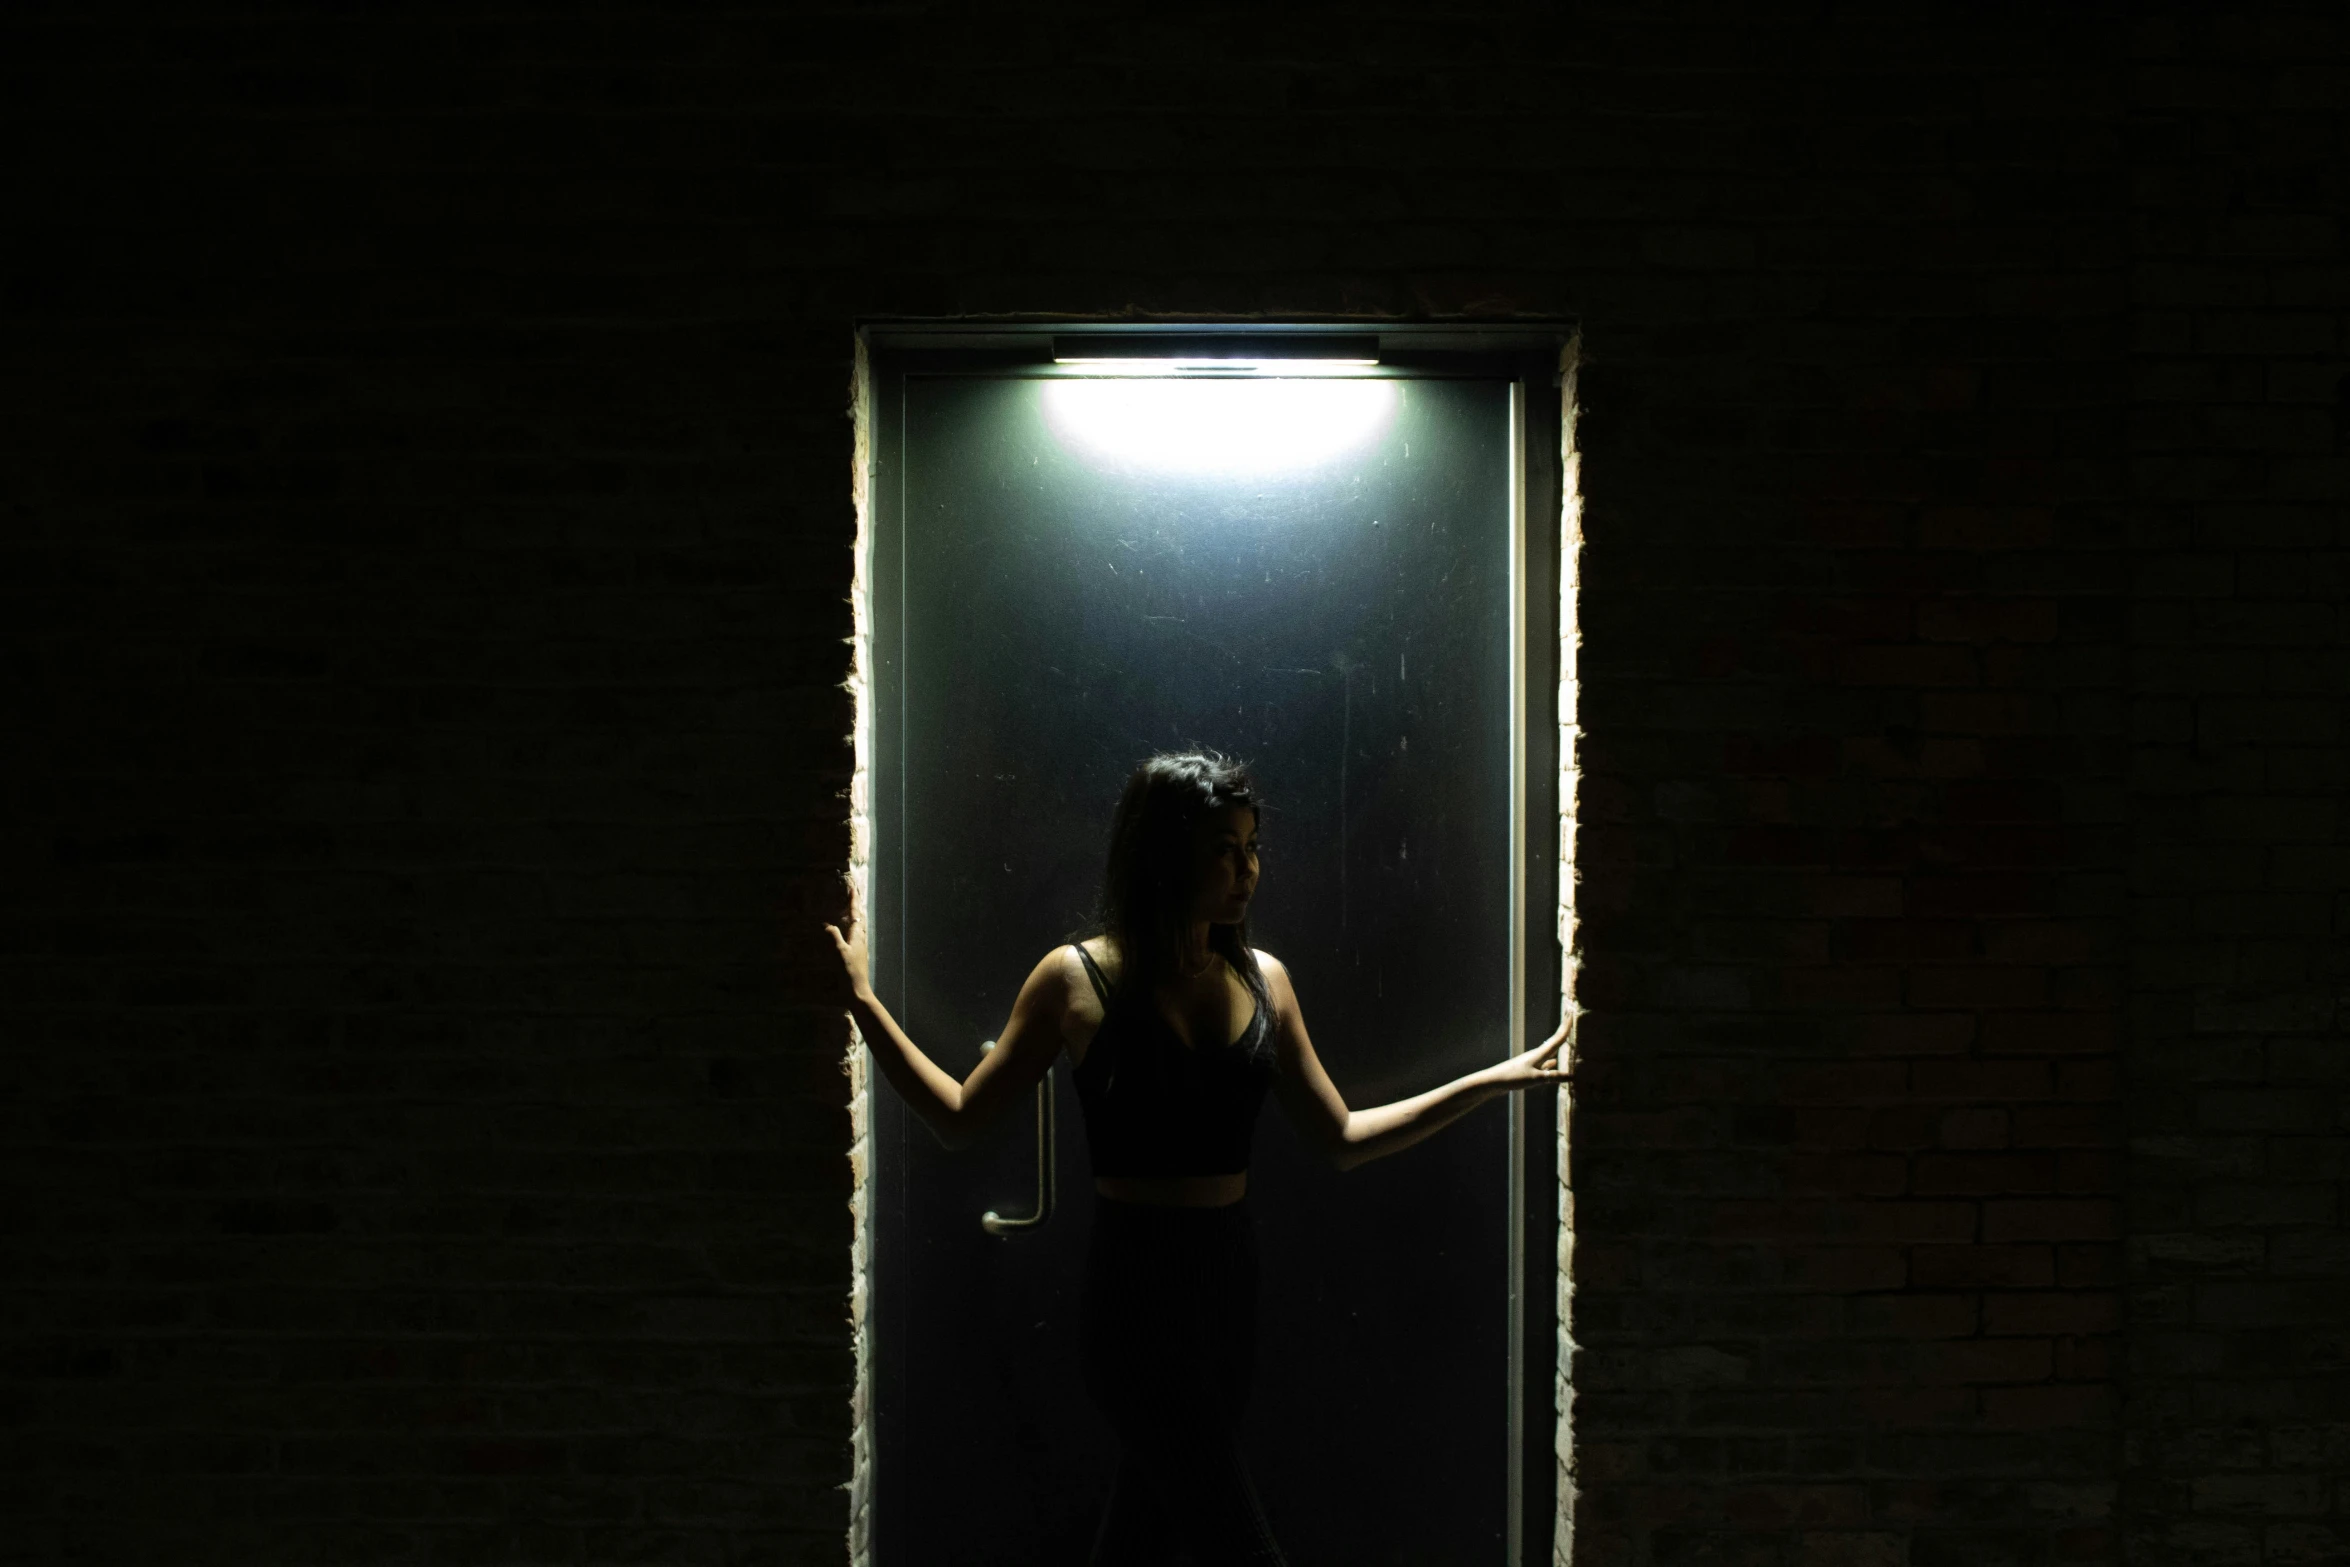 the woman is standing outside a doorway lit up by lighting